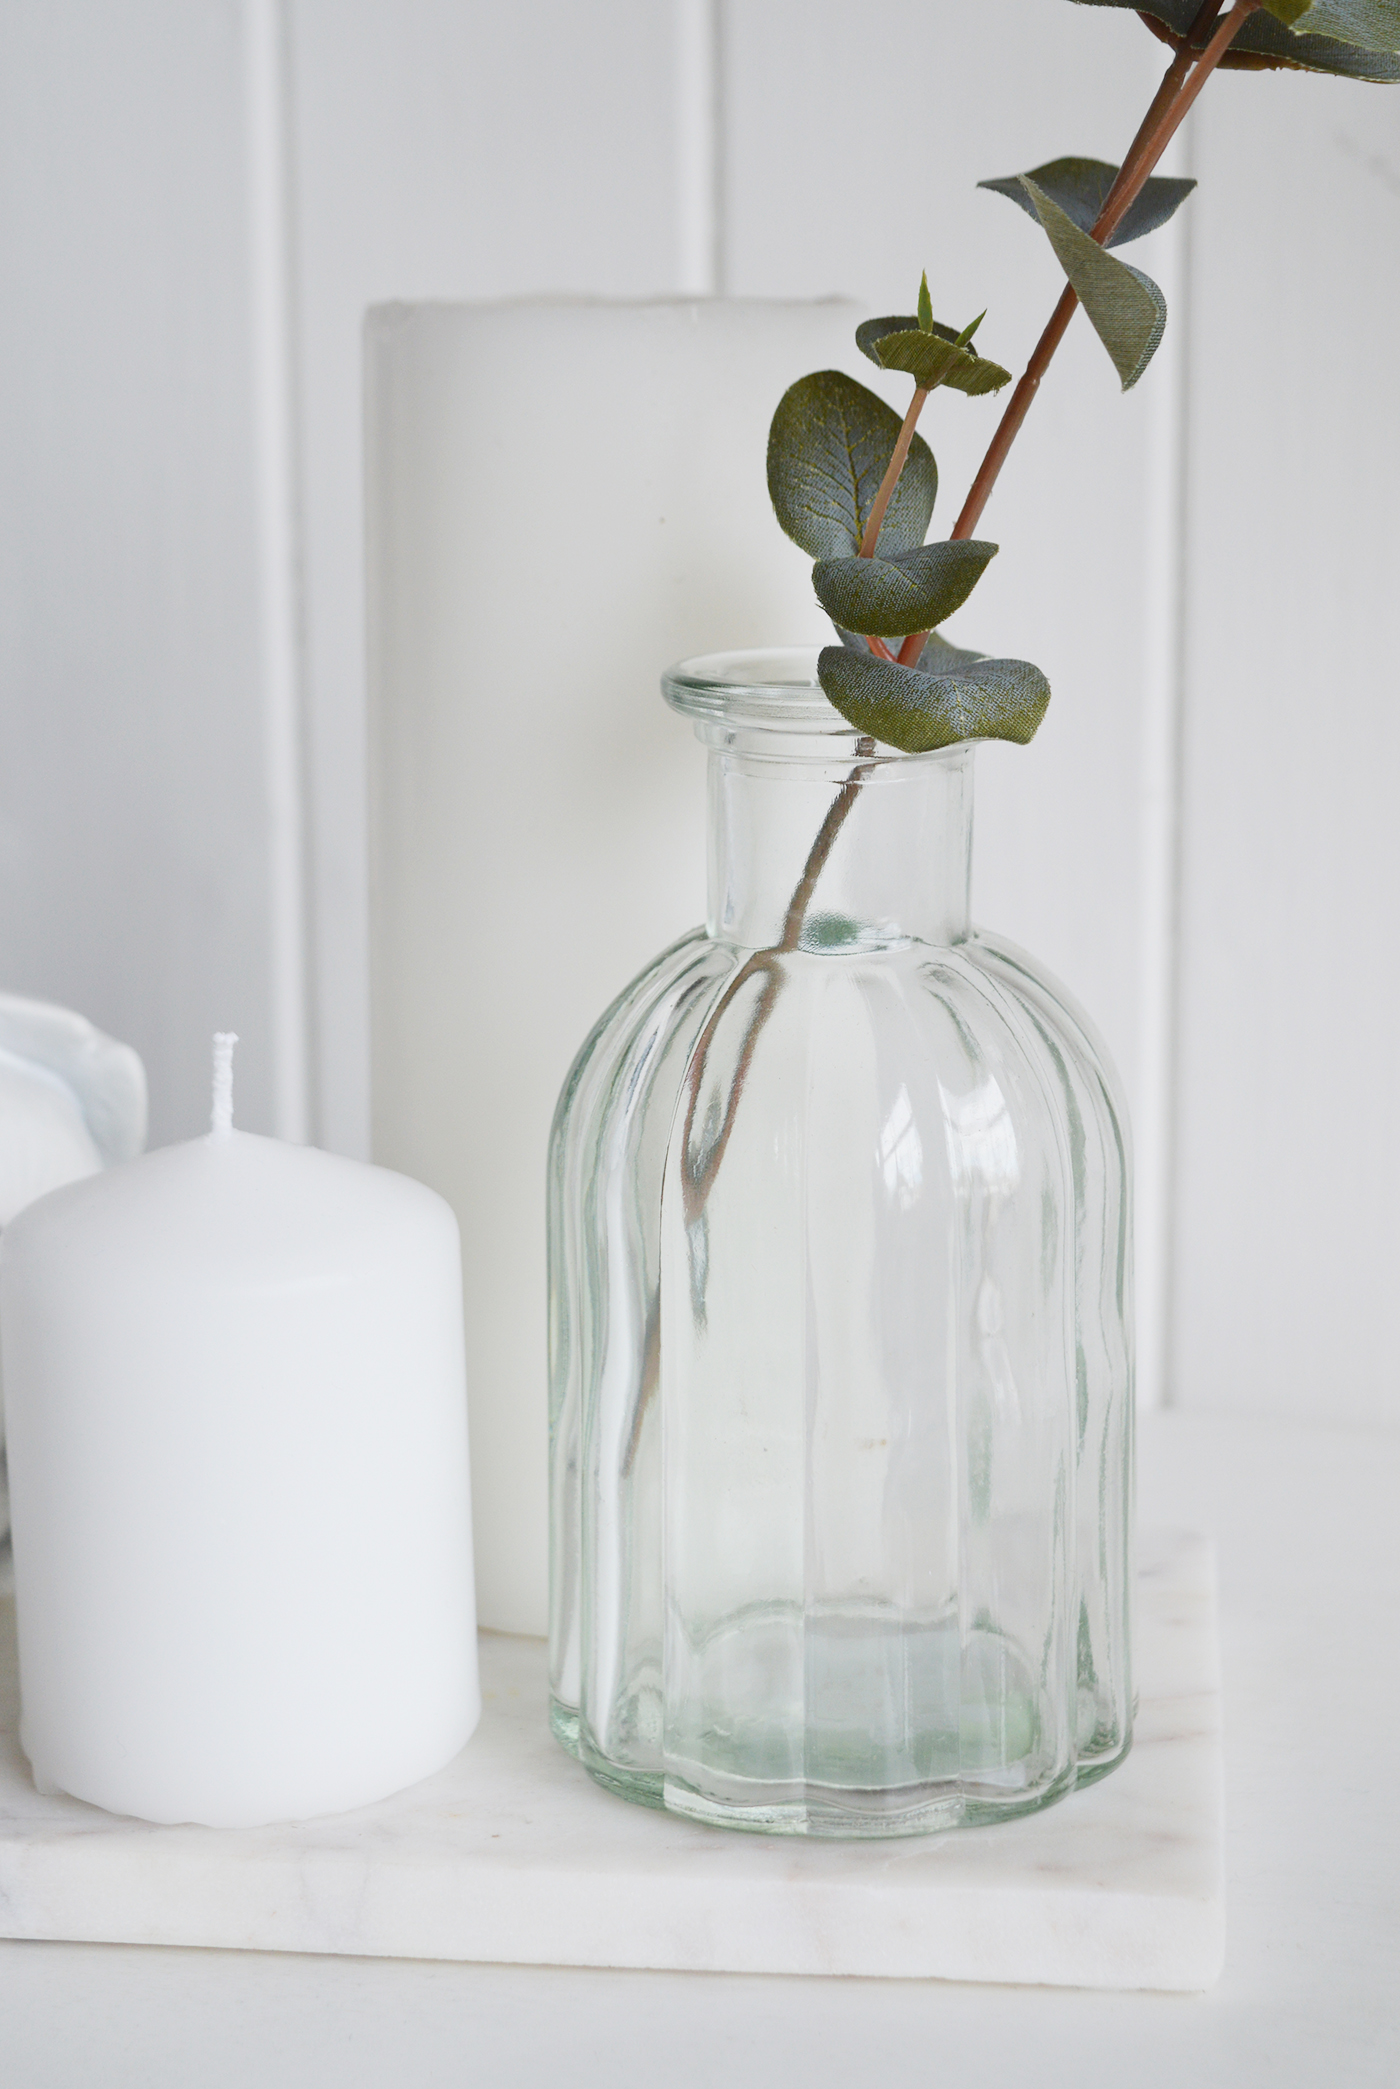 Newbury Bud vase for New England homes and interiors. White furniture from The White Lighthouse